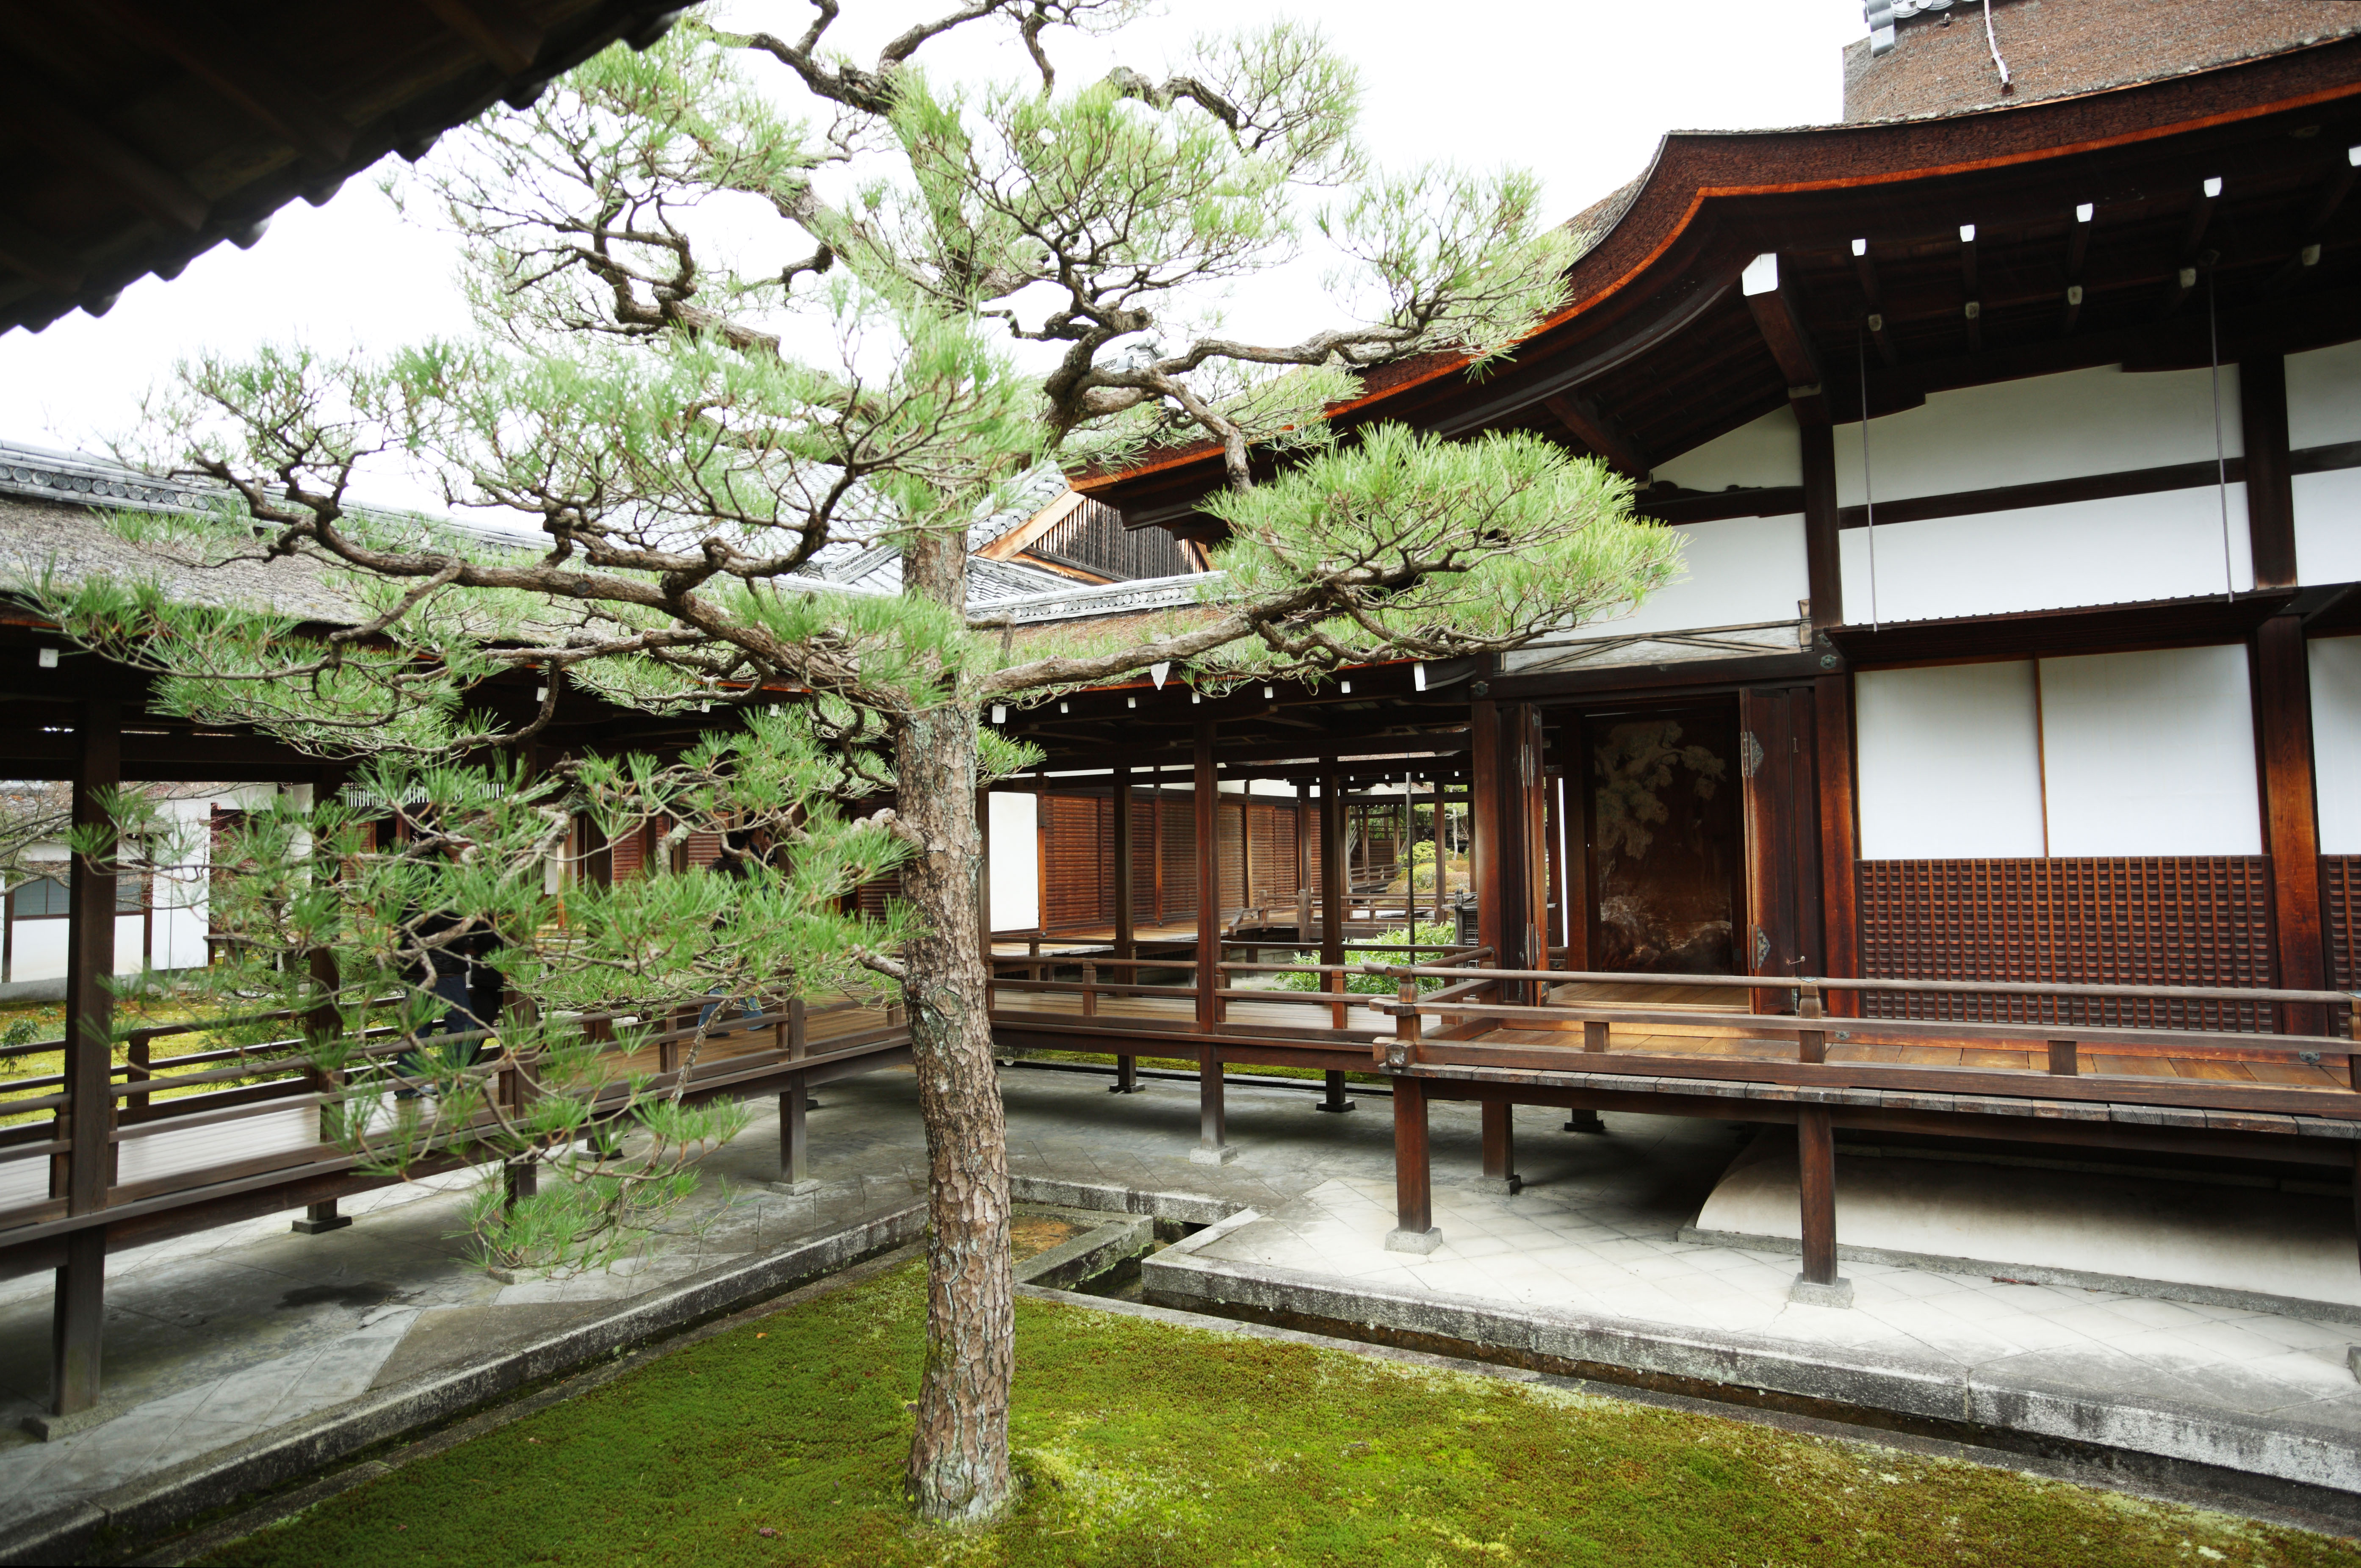 photo,material,free,landscape,picture,stock photo,Creative Commons,Ninna-ji Temple Shin-den, pine, Japanese-style room, Japanese-style building, roofed passage connecting buildings